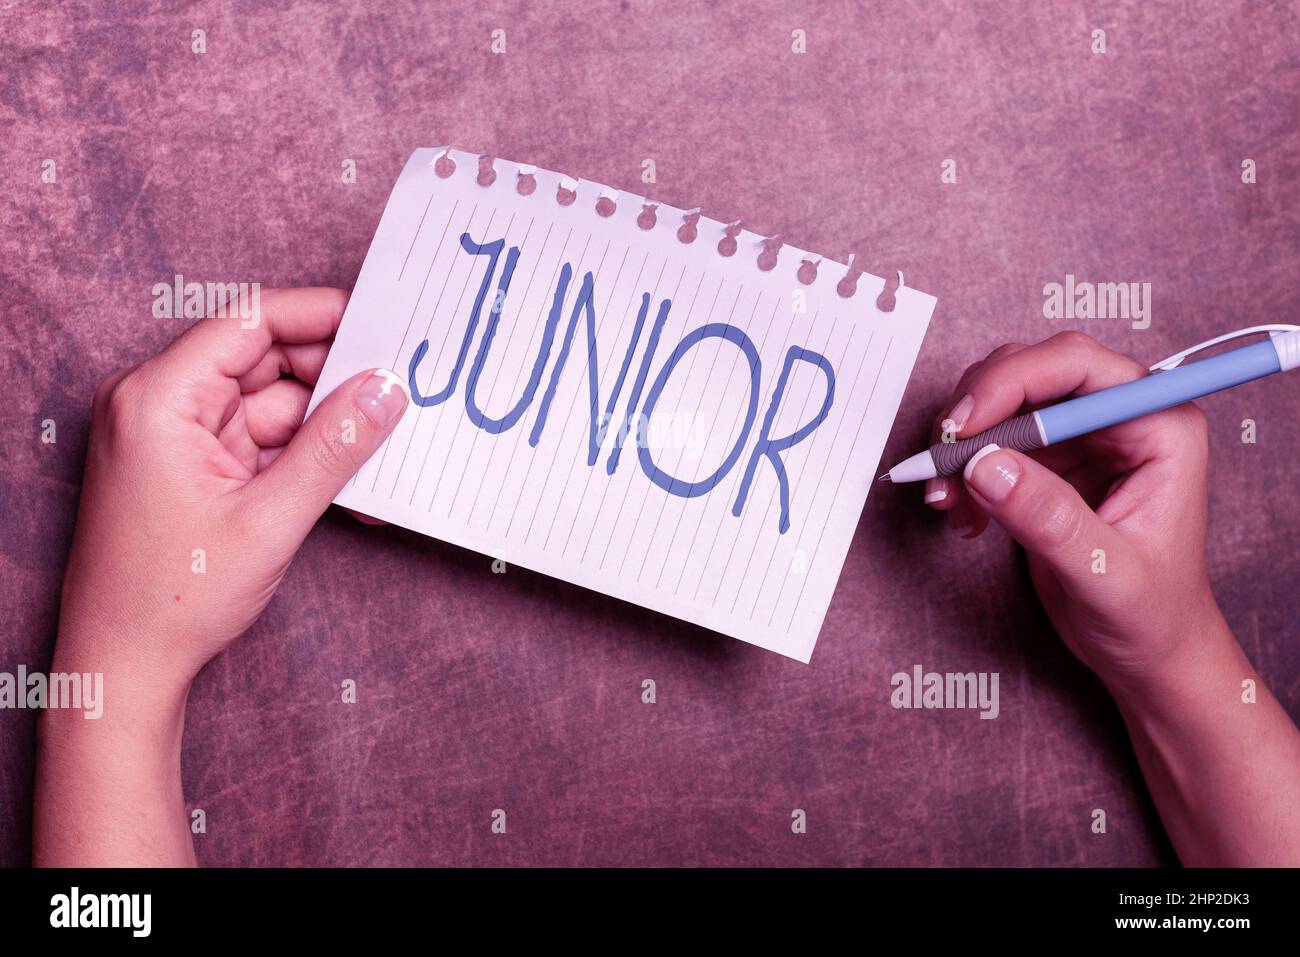 Sign displaying Junior, Business concept erson who is a specified number of years younger than someone else Writing Notes And Important Ideas Brainsto Stock Photo